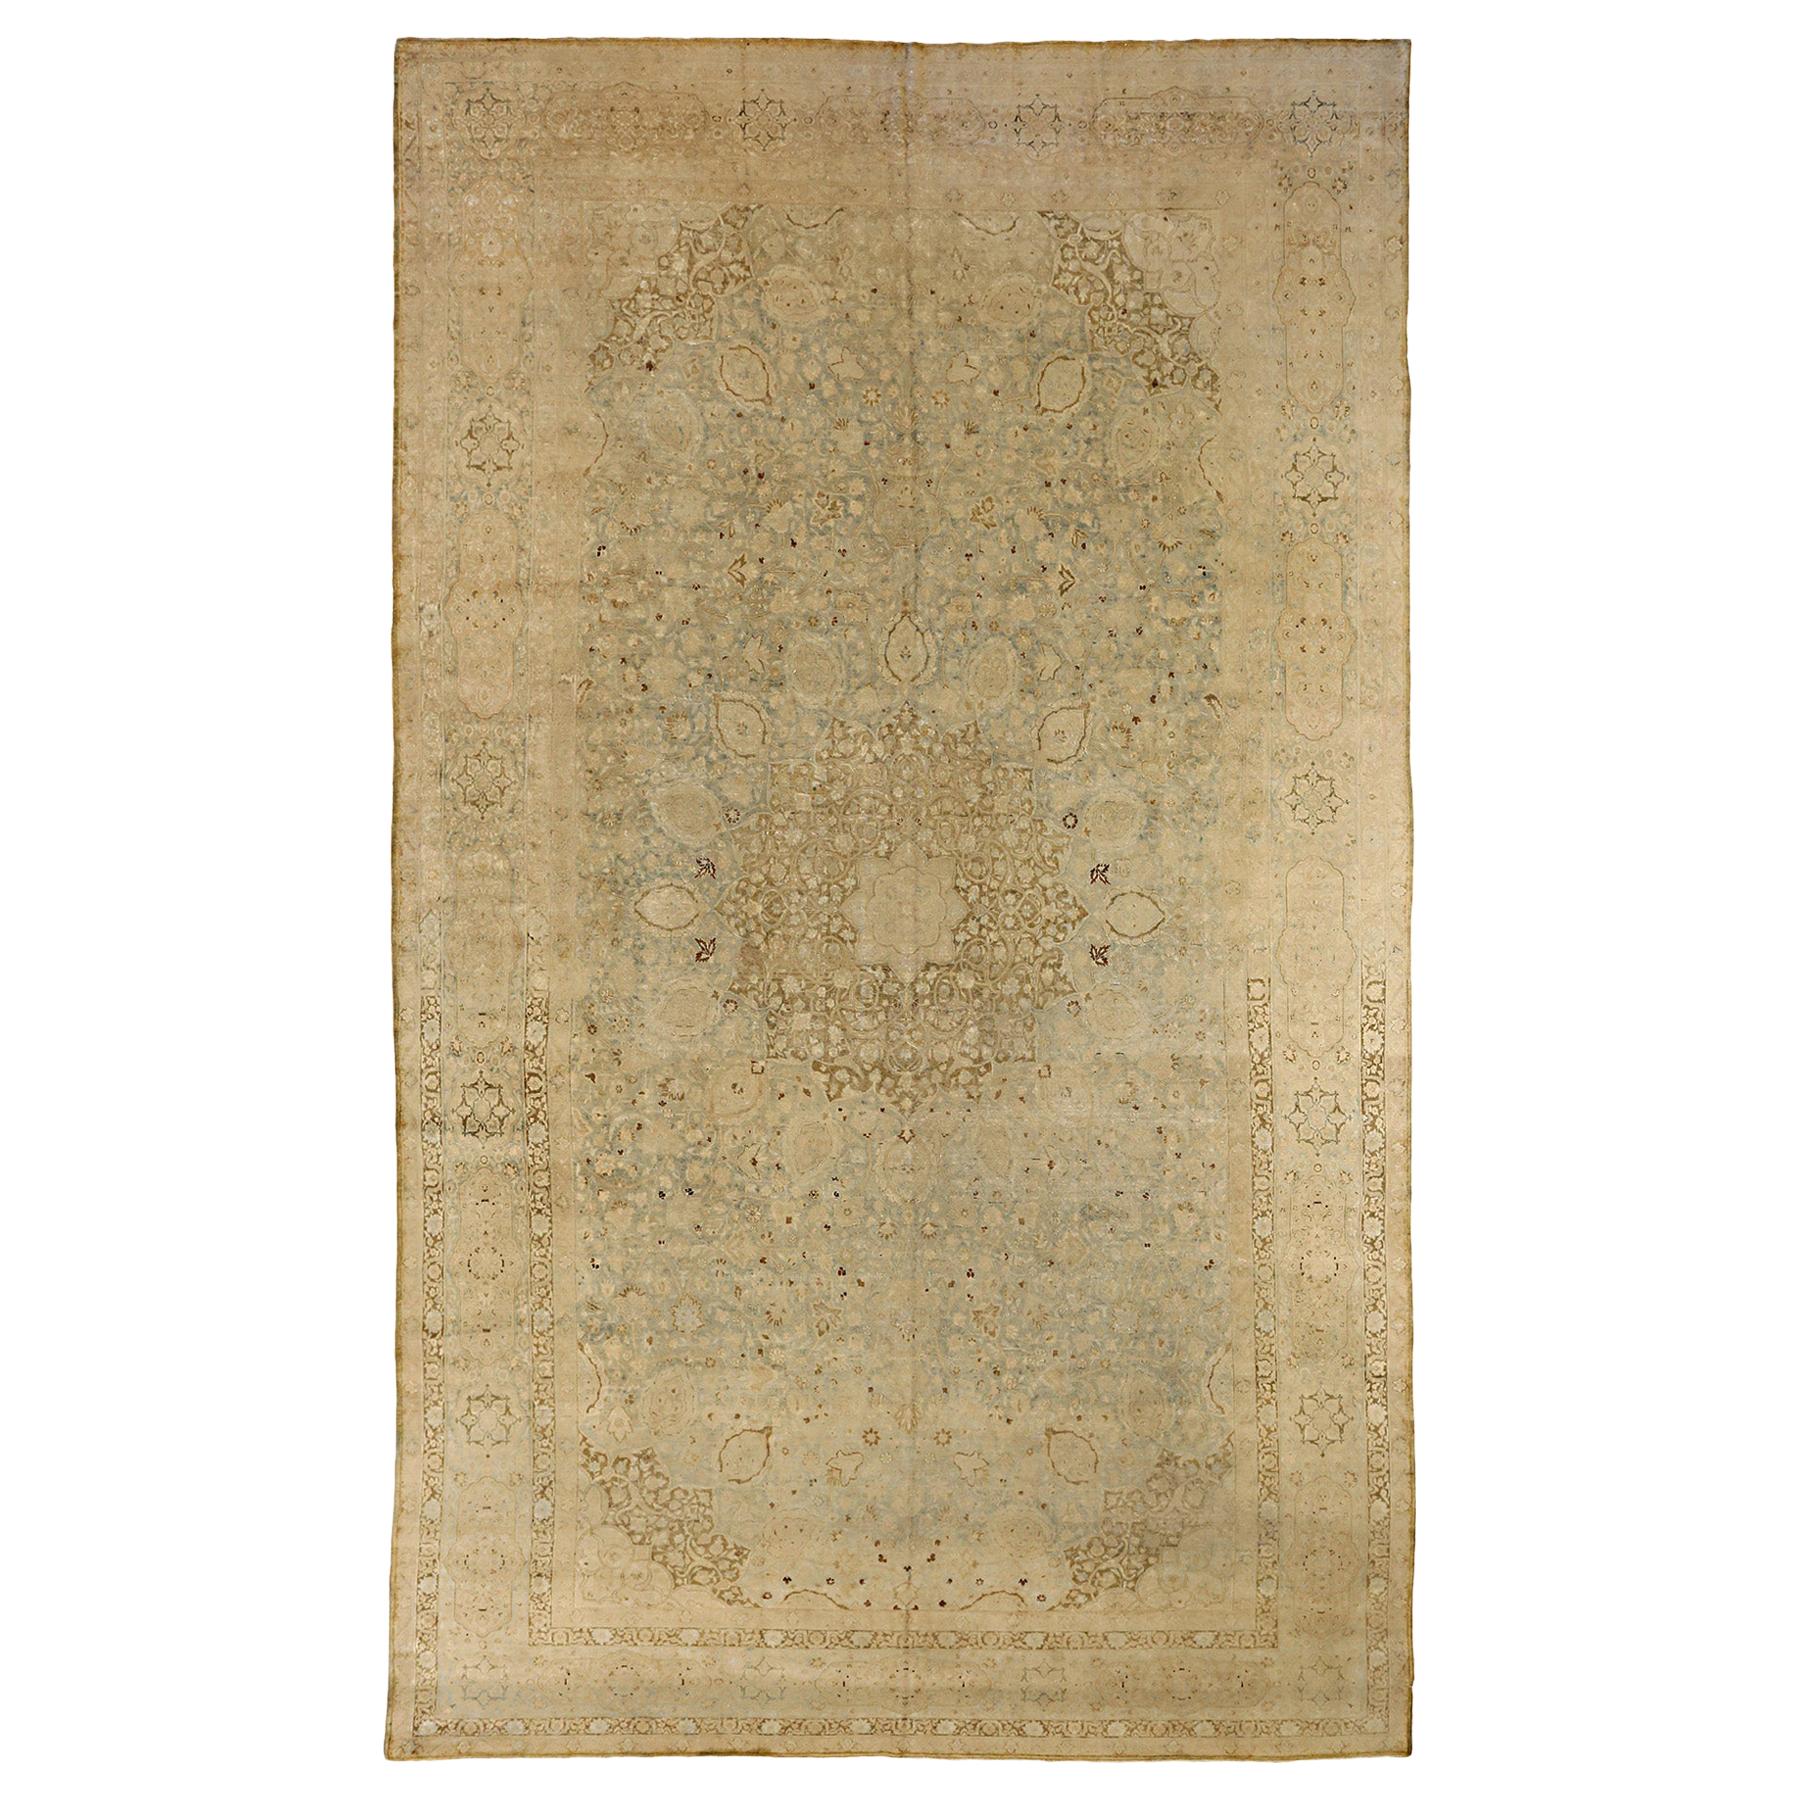 Antique Persian Tabriz Rug with Brown & Gray Floral Motifs on Ivory Field For Sale